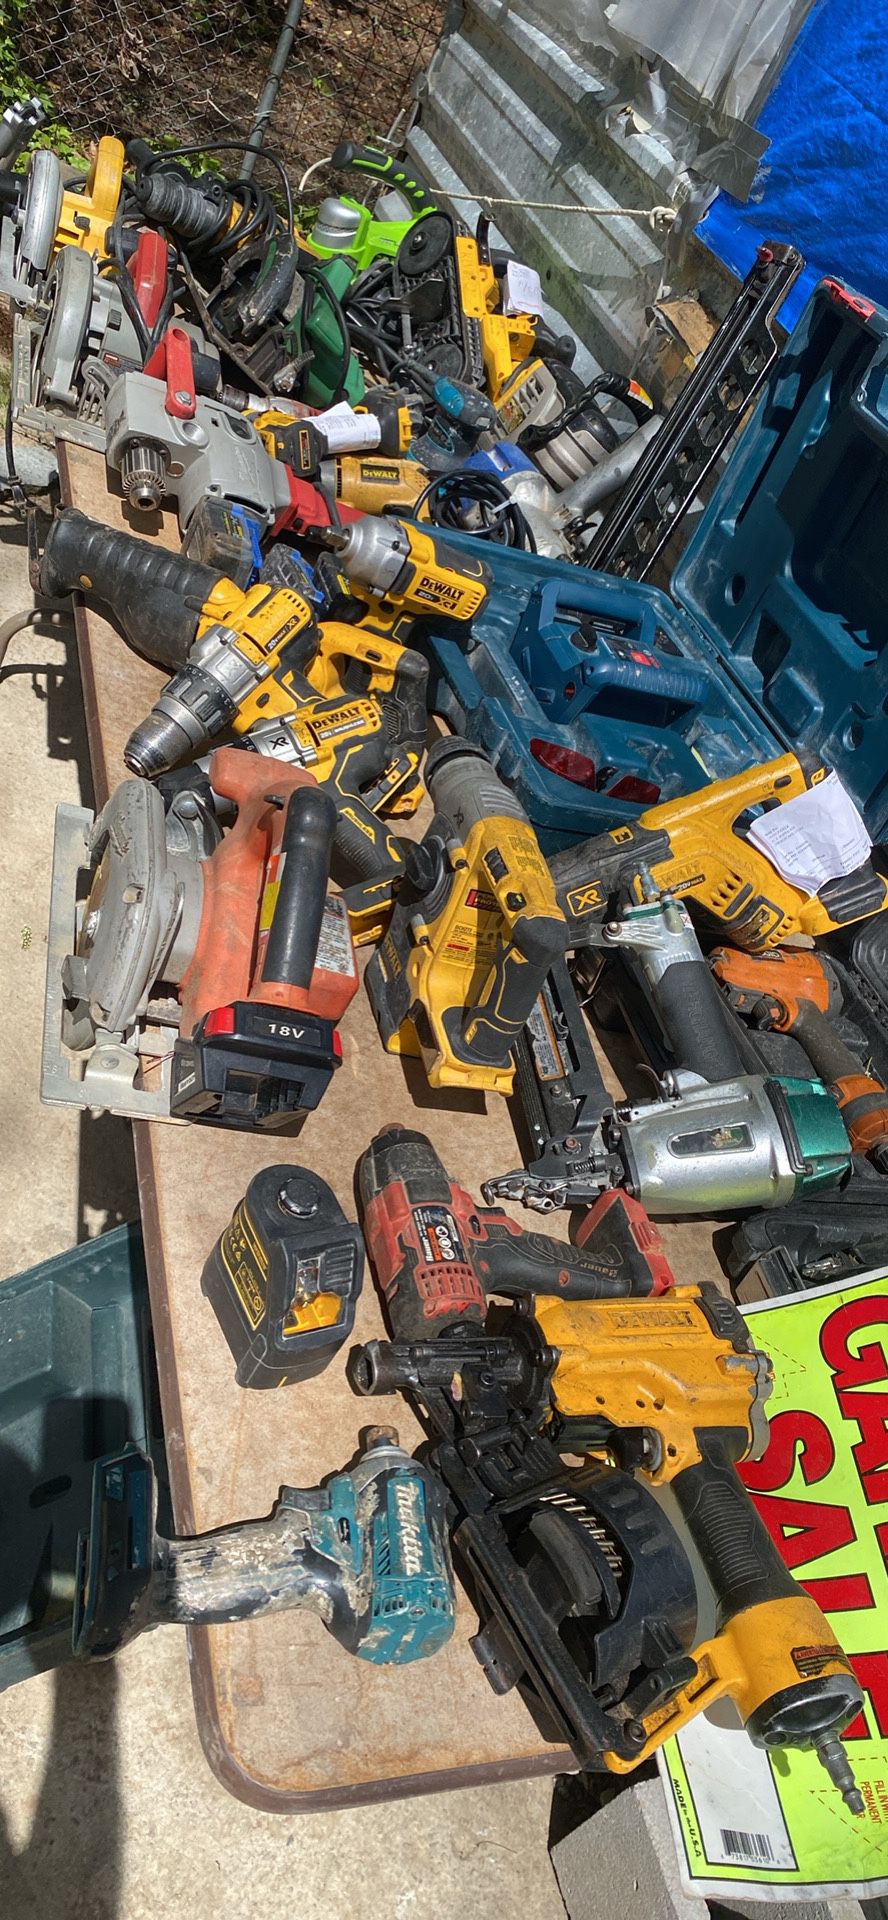 Used tool in good condition opportunity price prices range from $50 to $90 -$120 $1580 warranty 1 month.   There is a guarantee of what you pay in cre